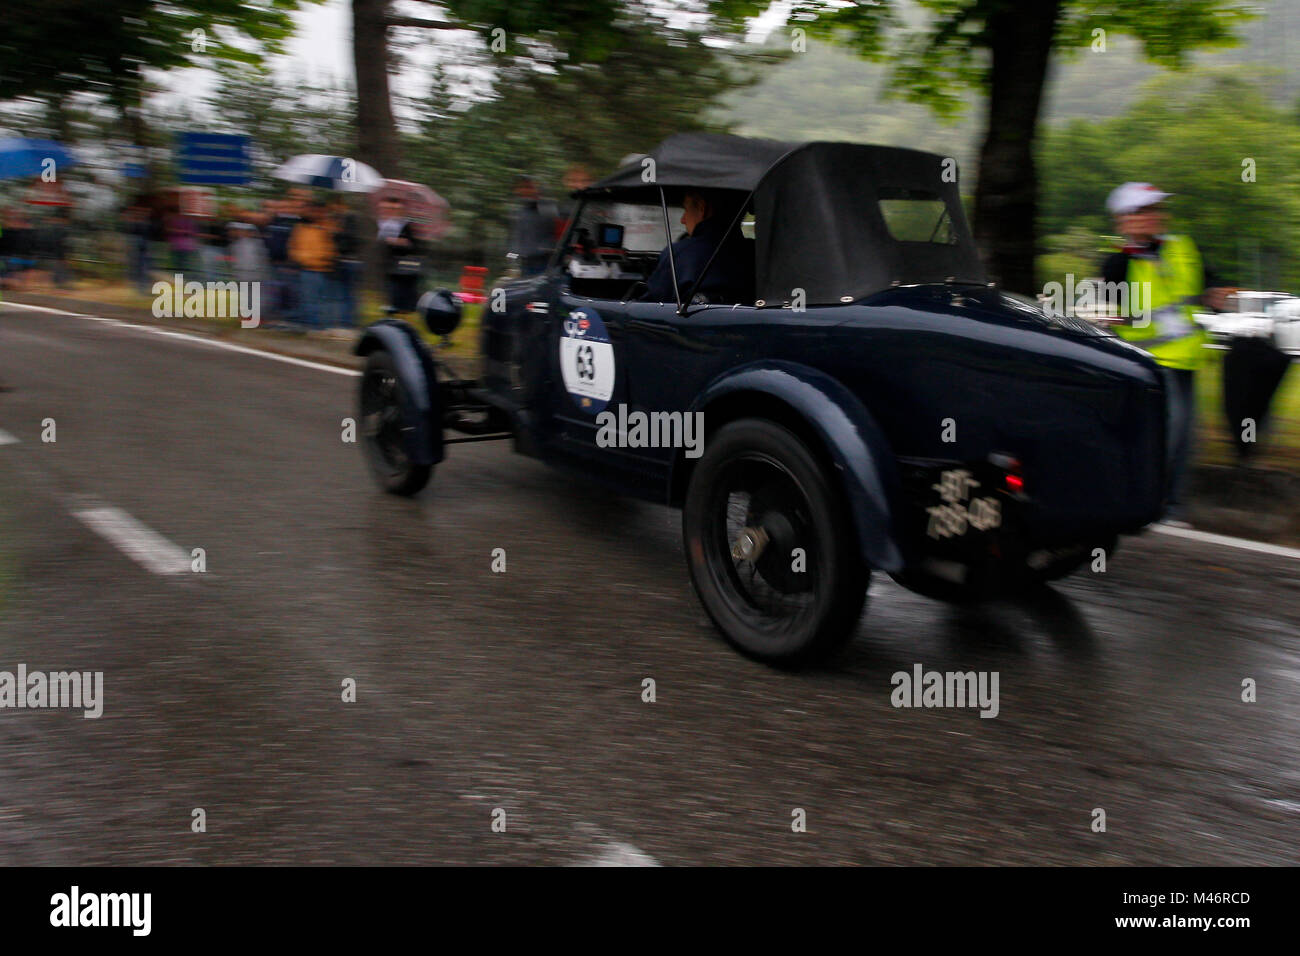 Pistoia, Italy. 20th, May 2017.  Crew composed by Mauro Ferrari and Andrea Ferrari from Italy with their model car, BUGATTI Type 40 1929, moves quickl Stock Photo